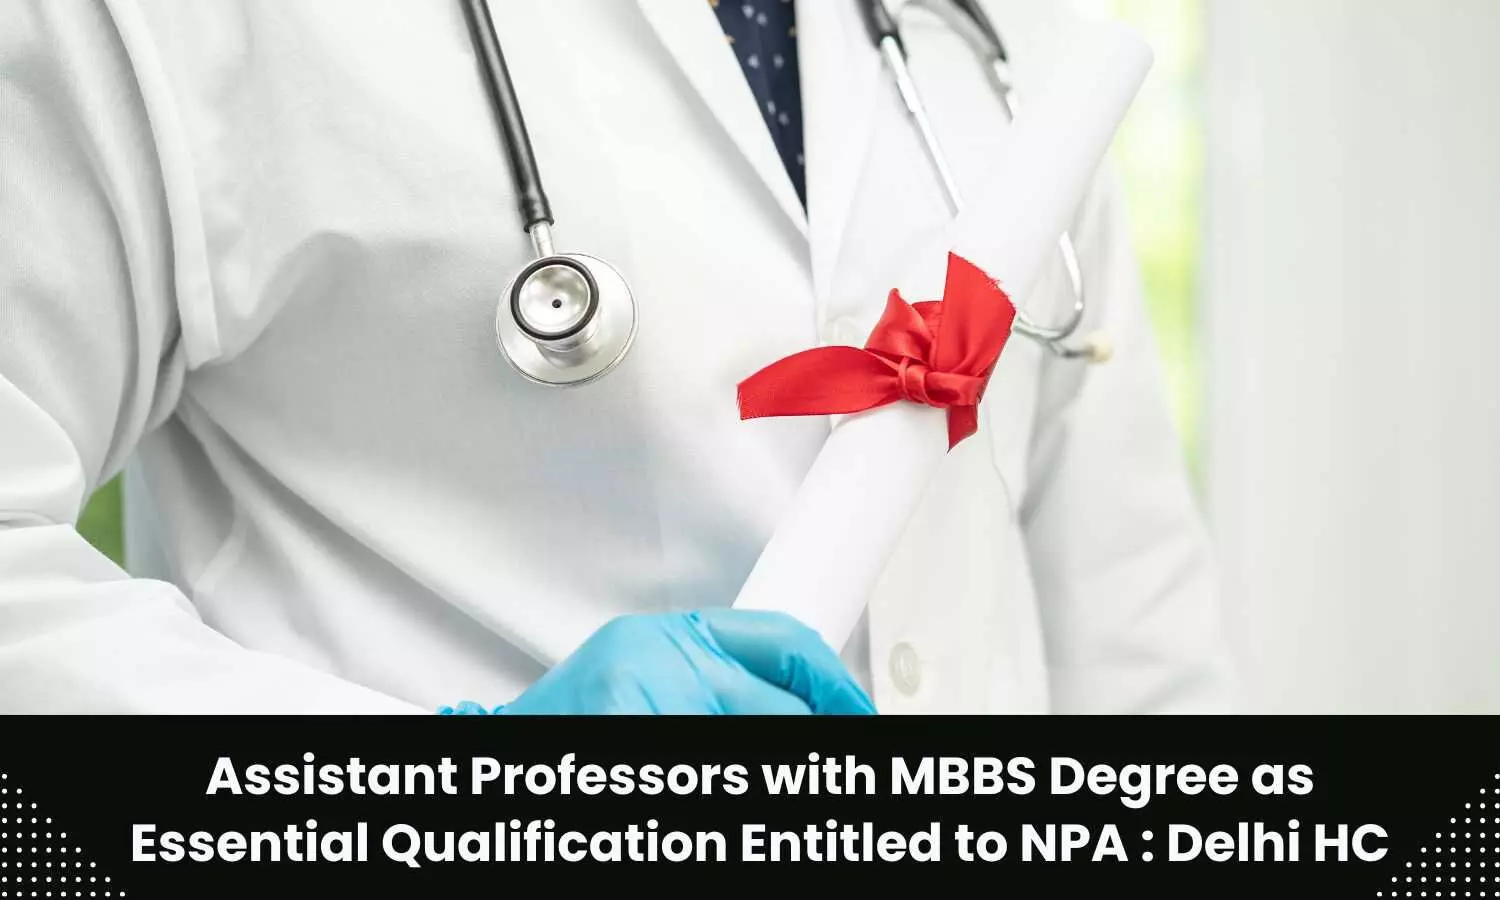 Assistant professors in Central University requiring MBBS degree as essential qualification entitled to NPA: Delhi High Court